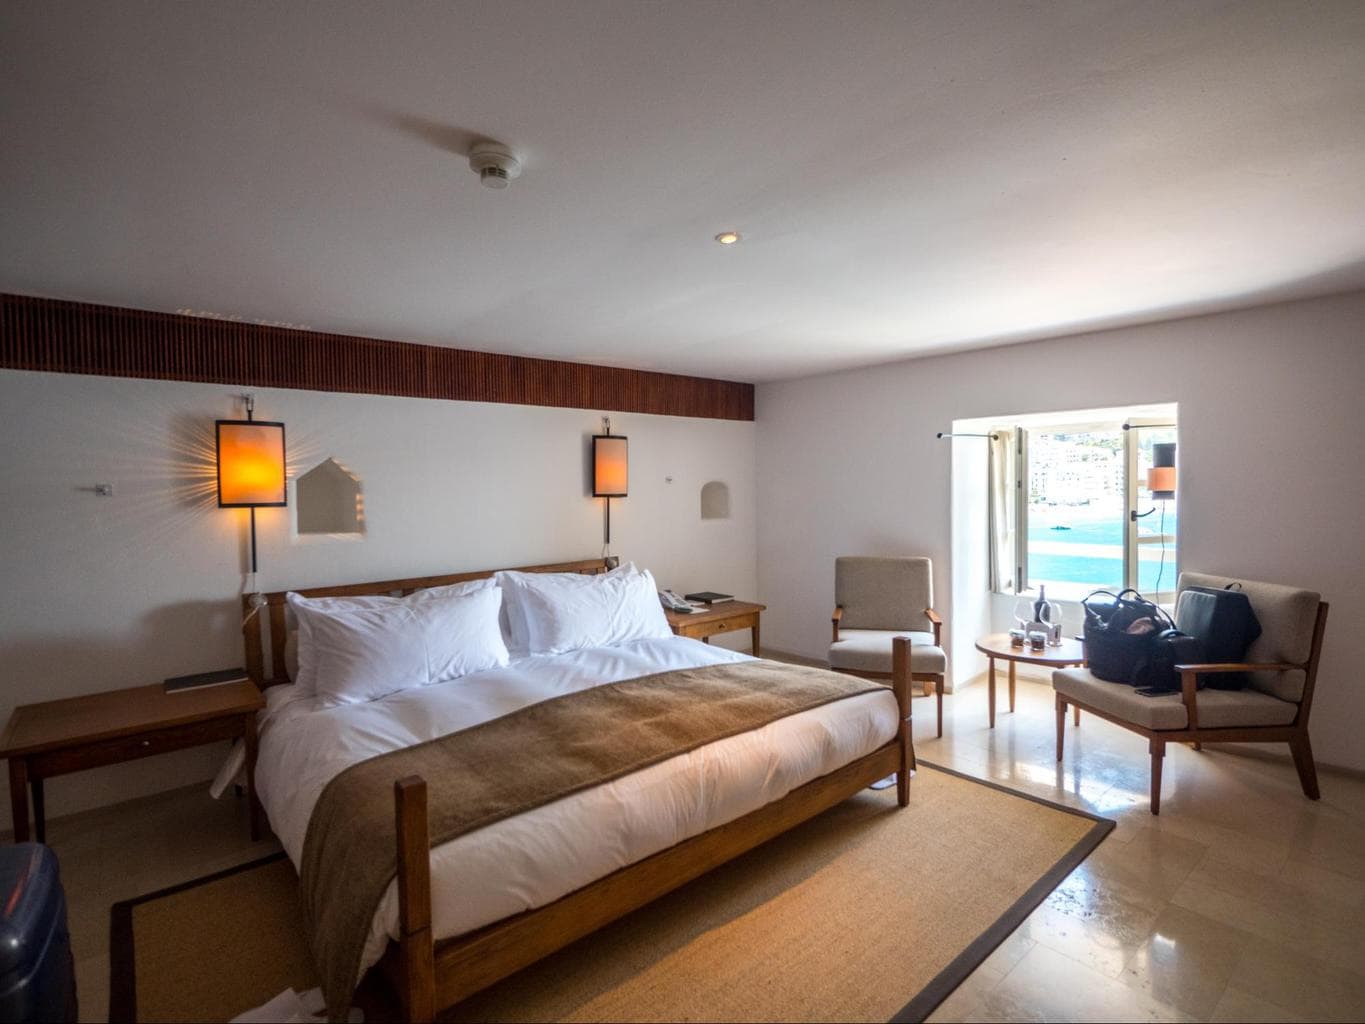 Deluxe cottage rooms at Aman Sveti Stefan